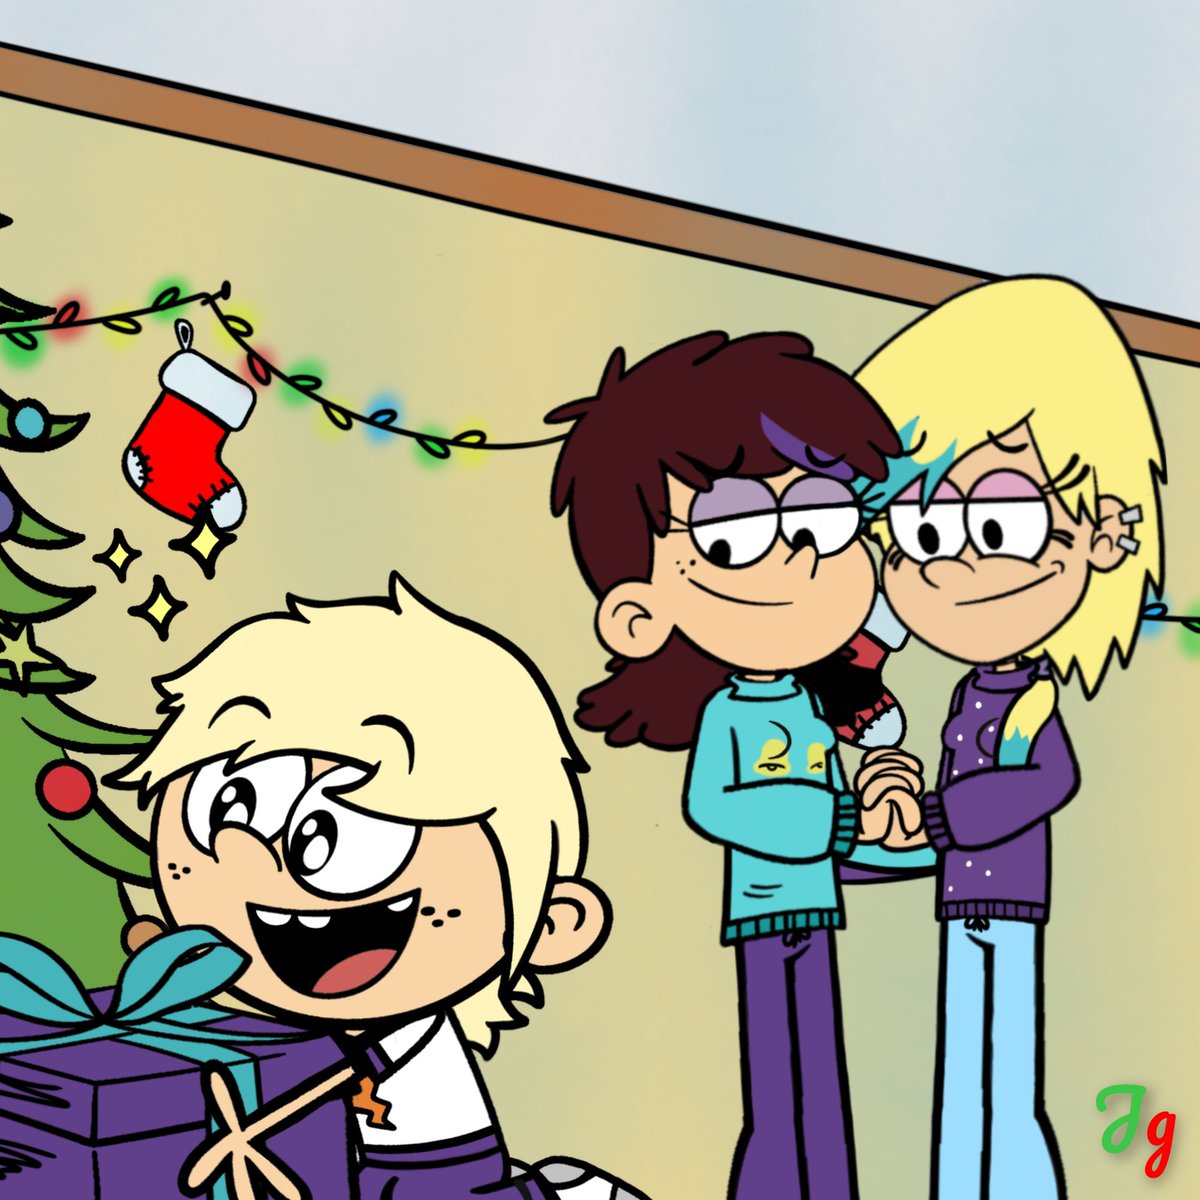 I loved getting presents as a kid it was magical

Happy Holidays y'all🎄

#loudhouse #laithloud #lunaloud #samsharp